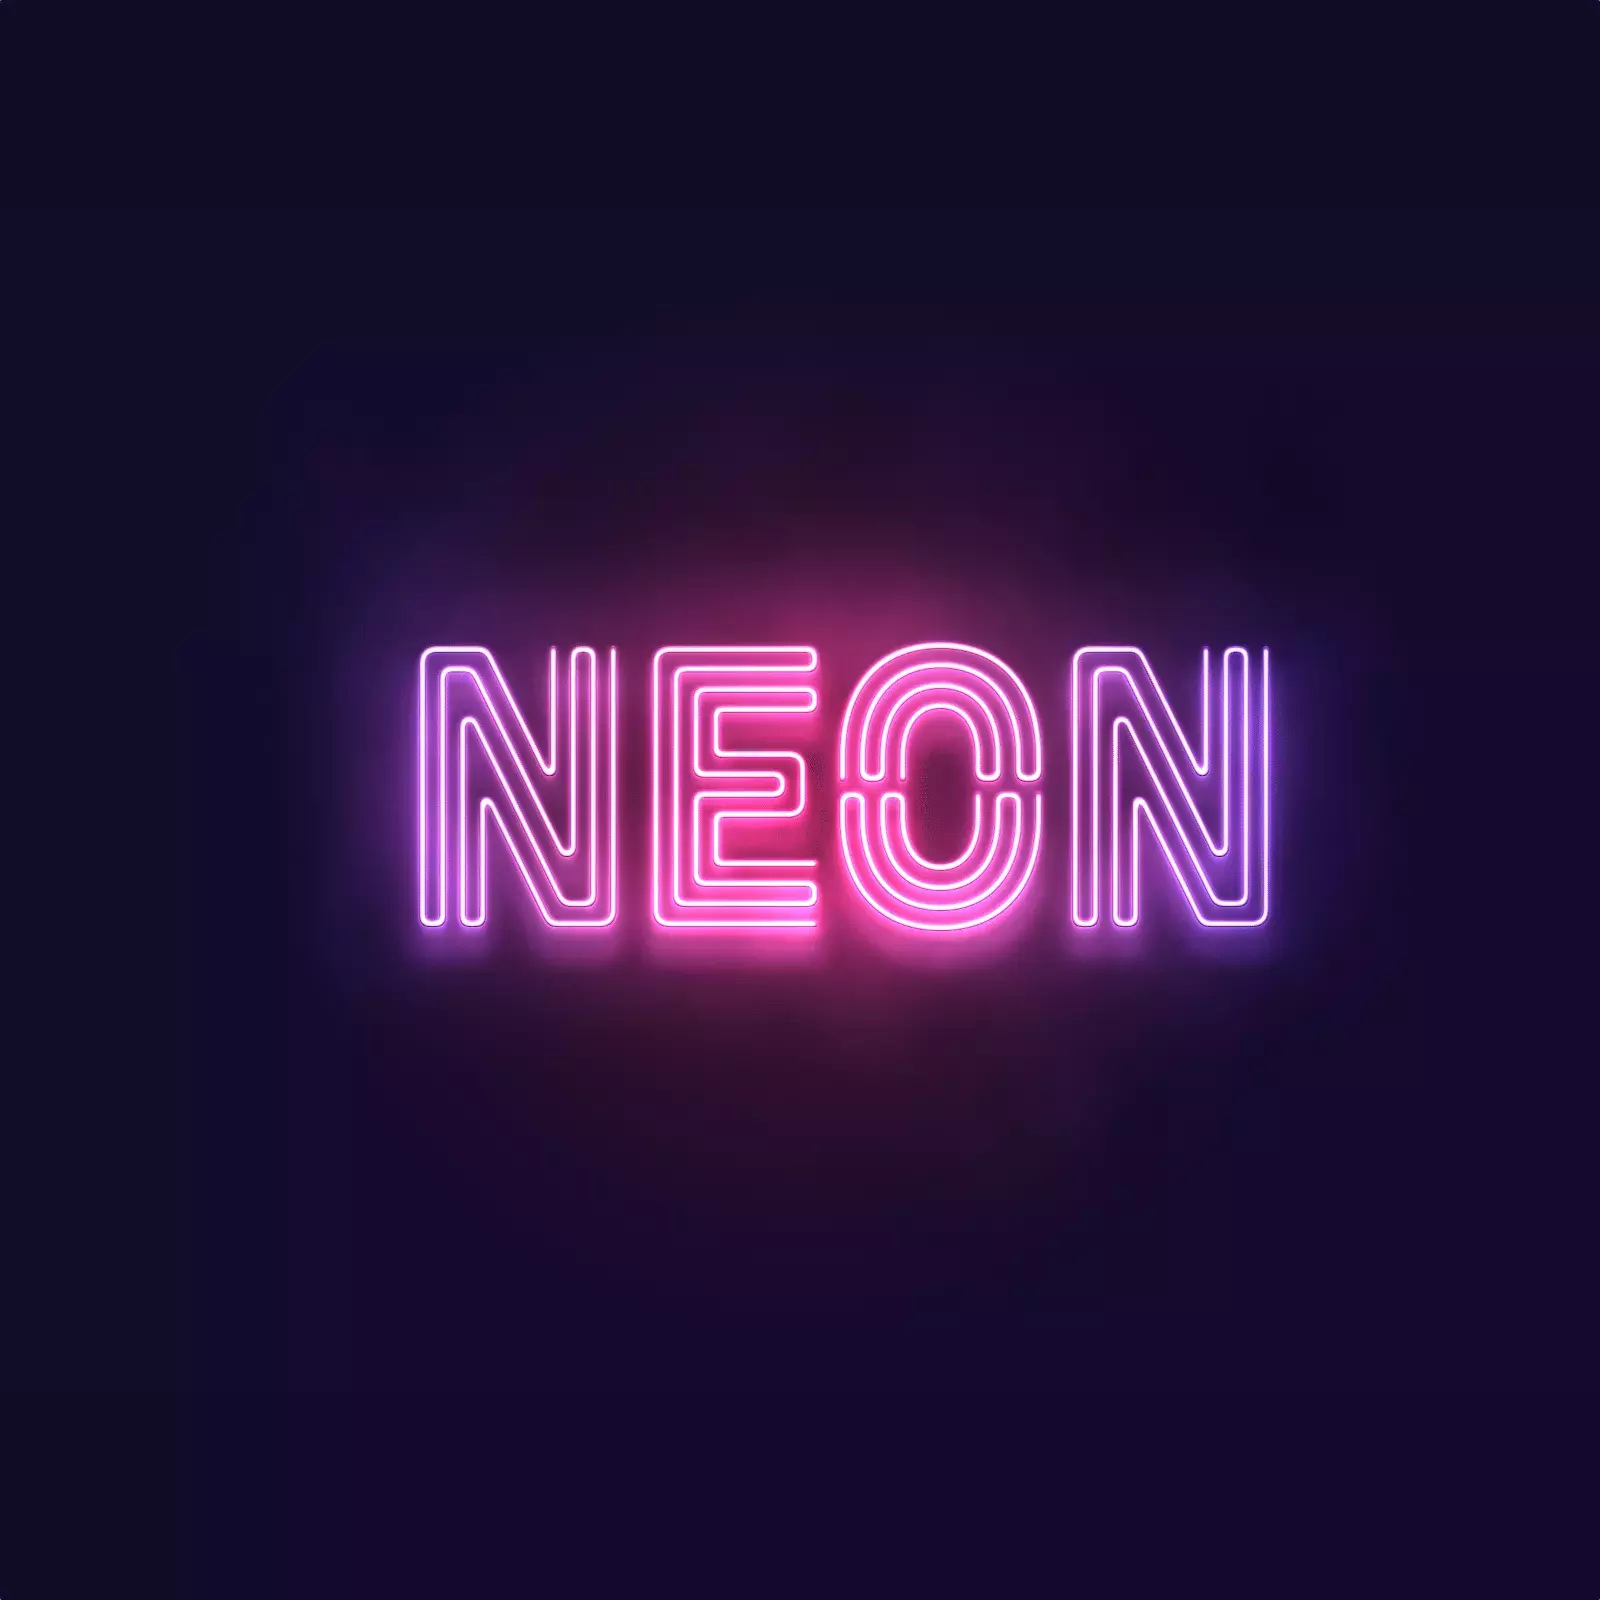 Neon light effect in Photoshop [revisited]